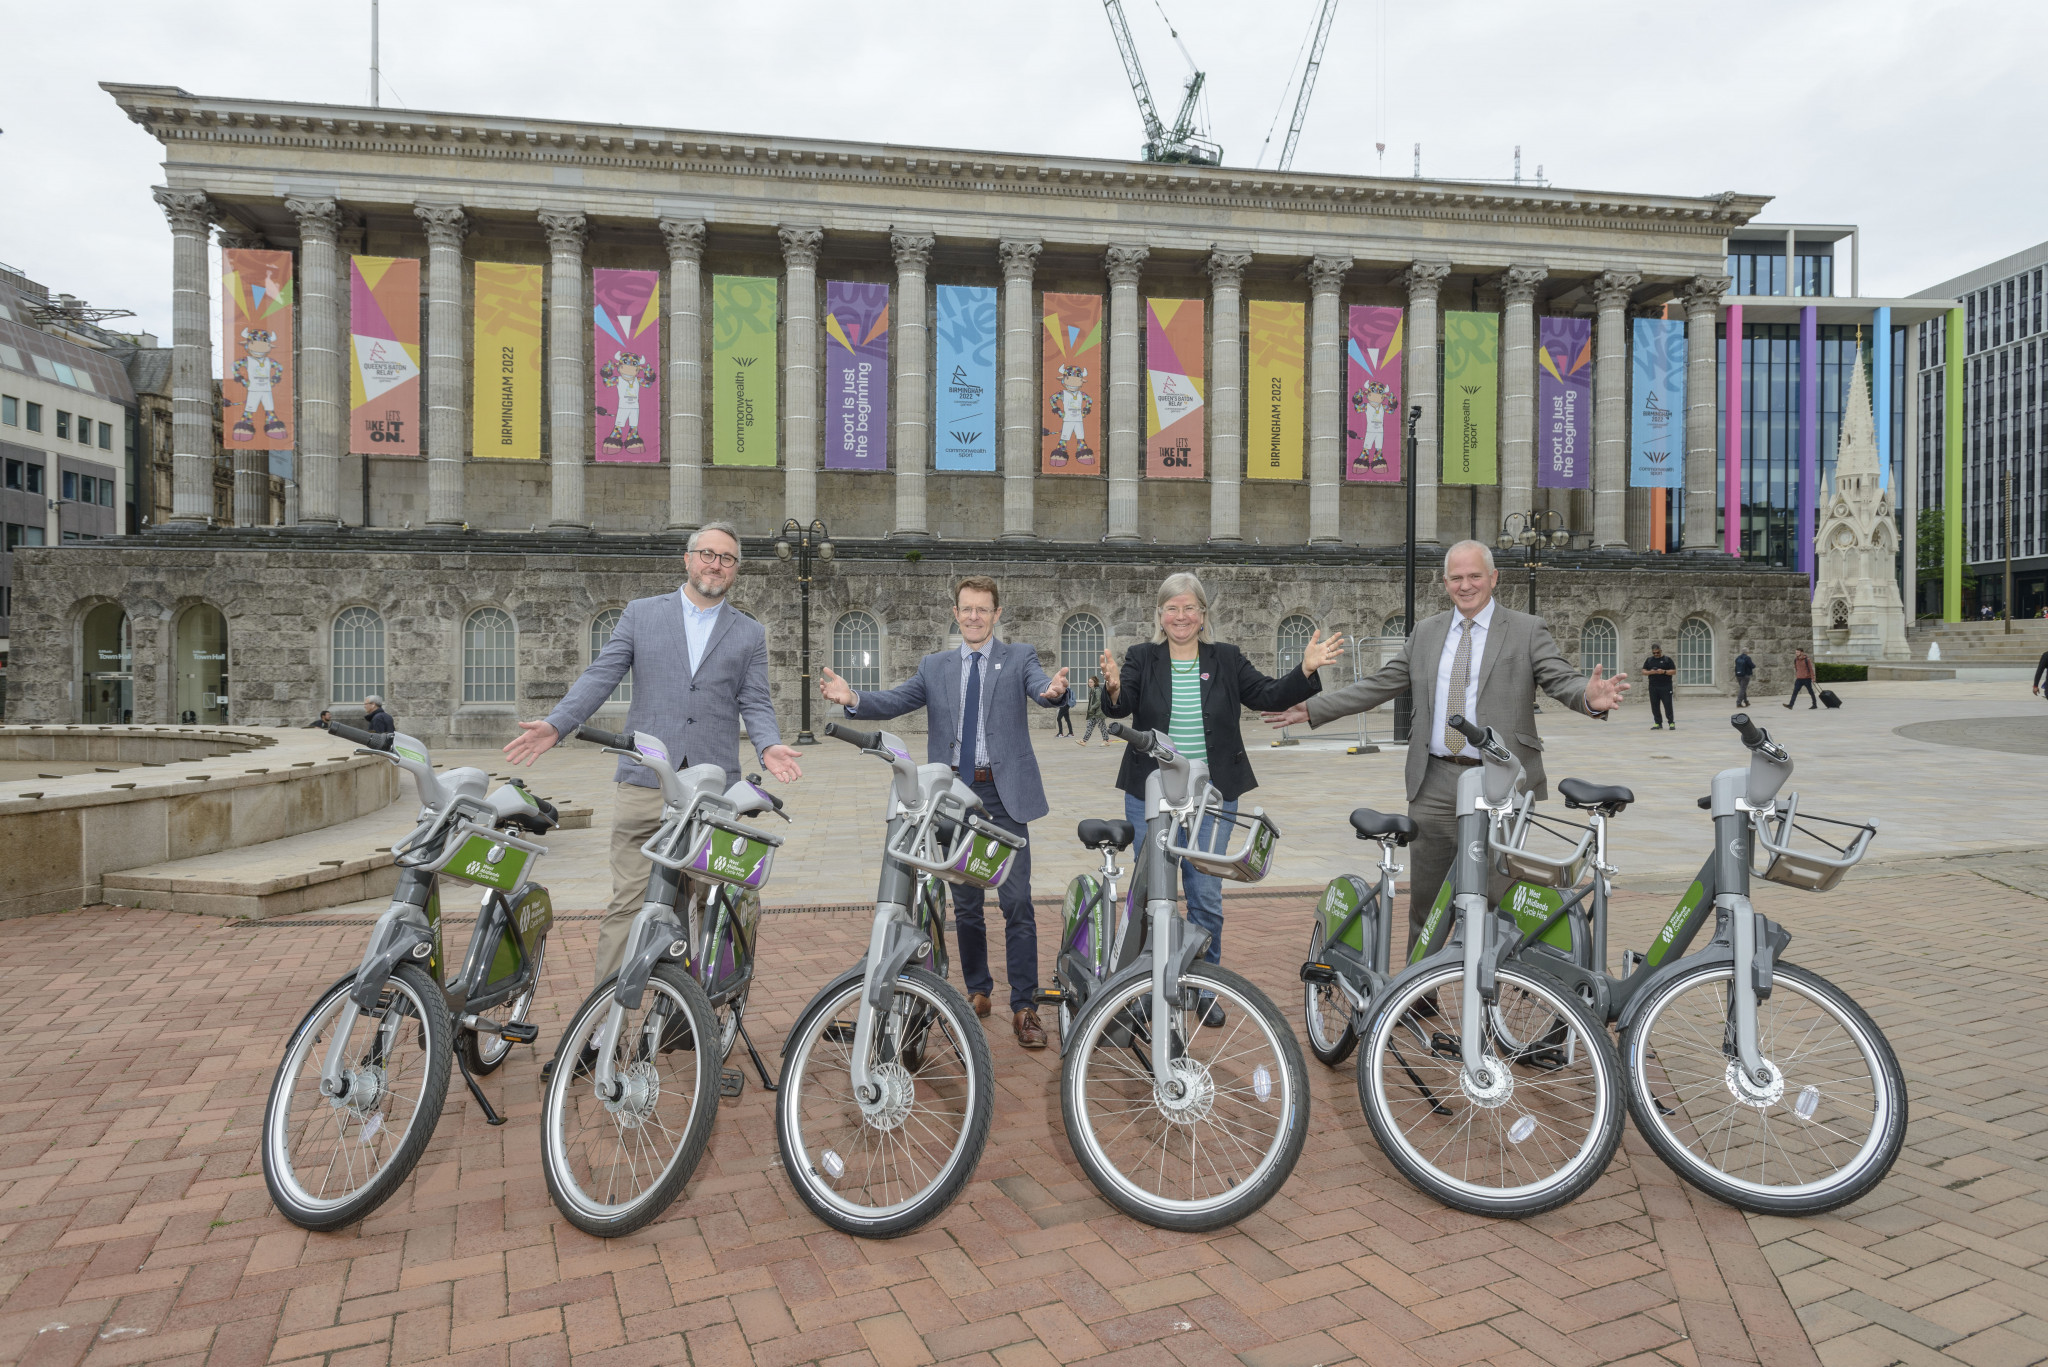 Free cycle offer announced for Birmingham 2022 Commonwealth Games